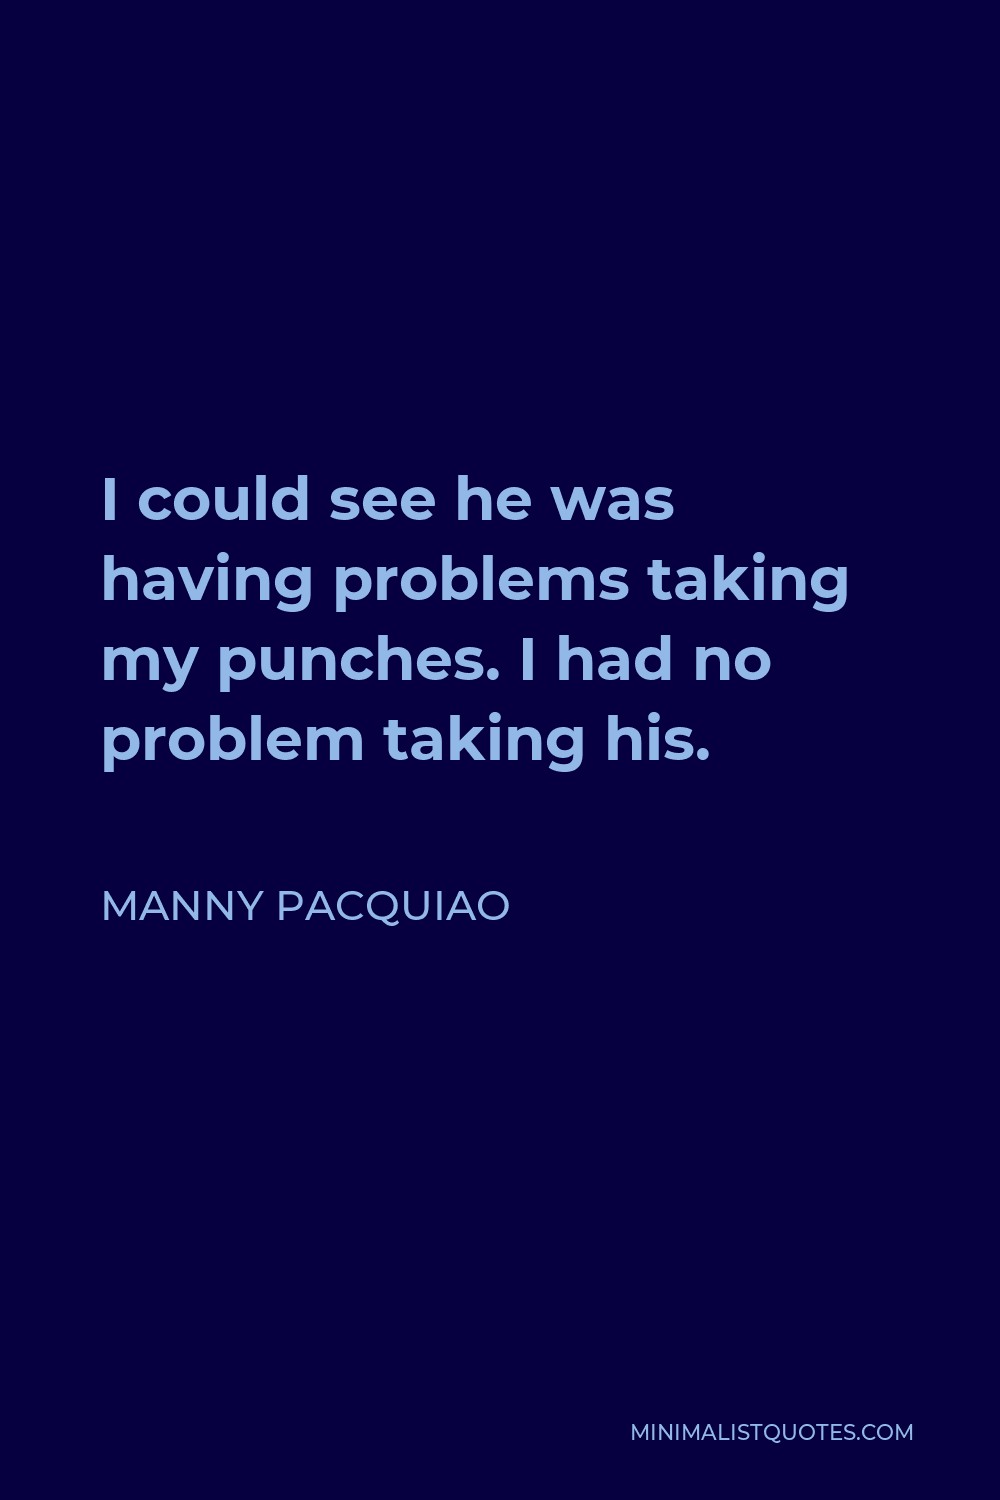 Manny Pacquiao Quote - I could see he was having problems taking my punches. I had no problem taking his.